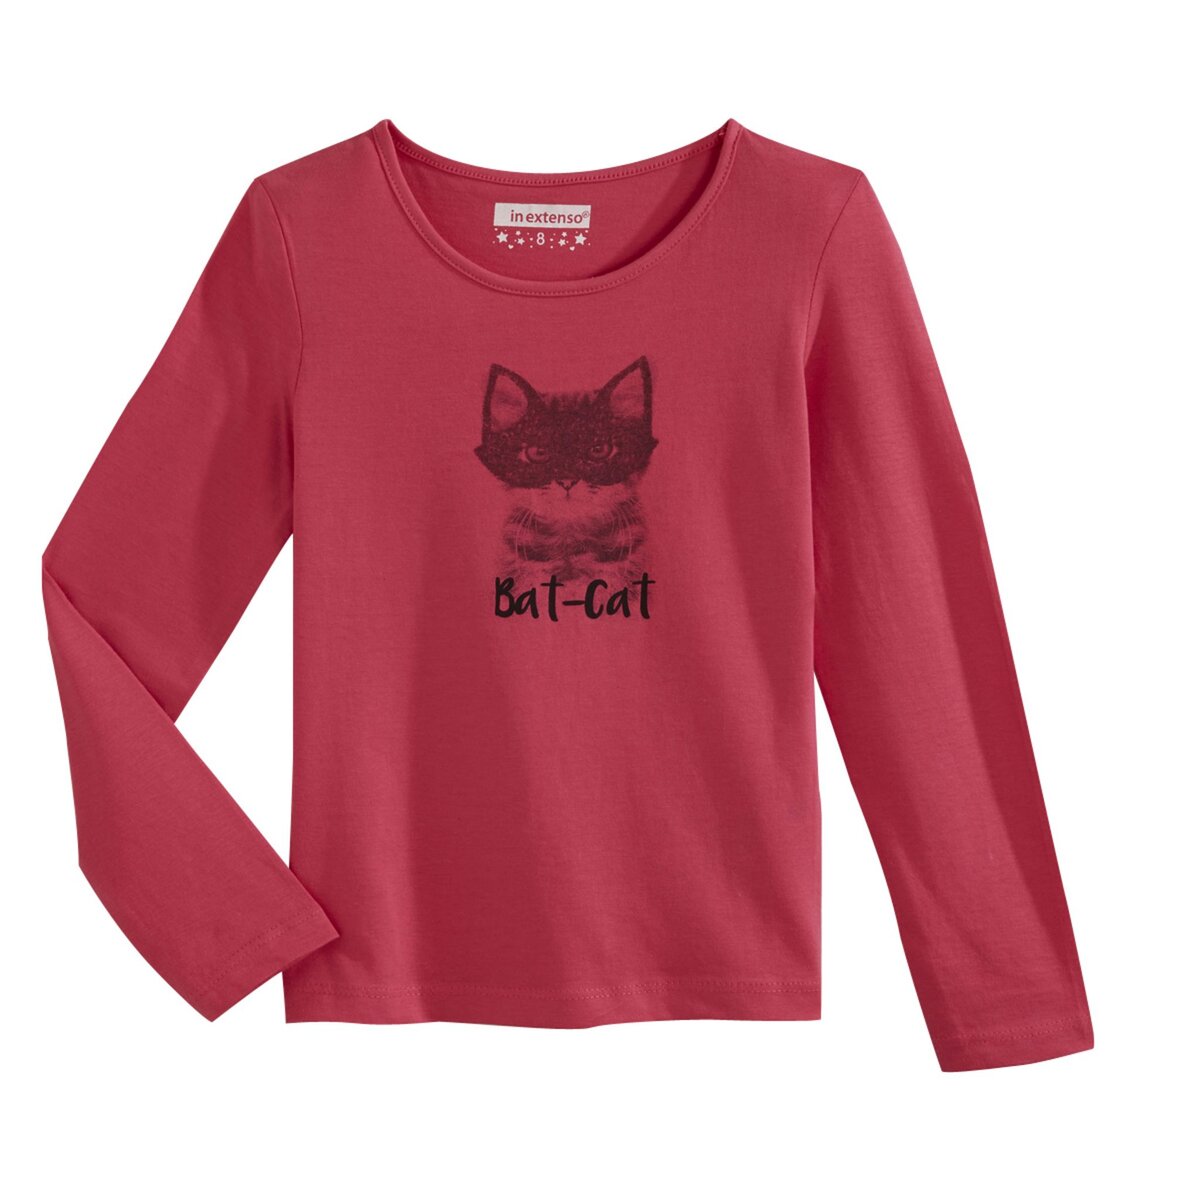 IN EXTENSO Tee shirt manches longues imprimé chat fille